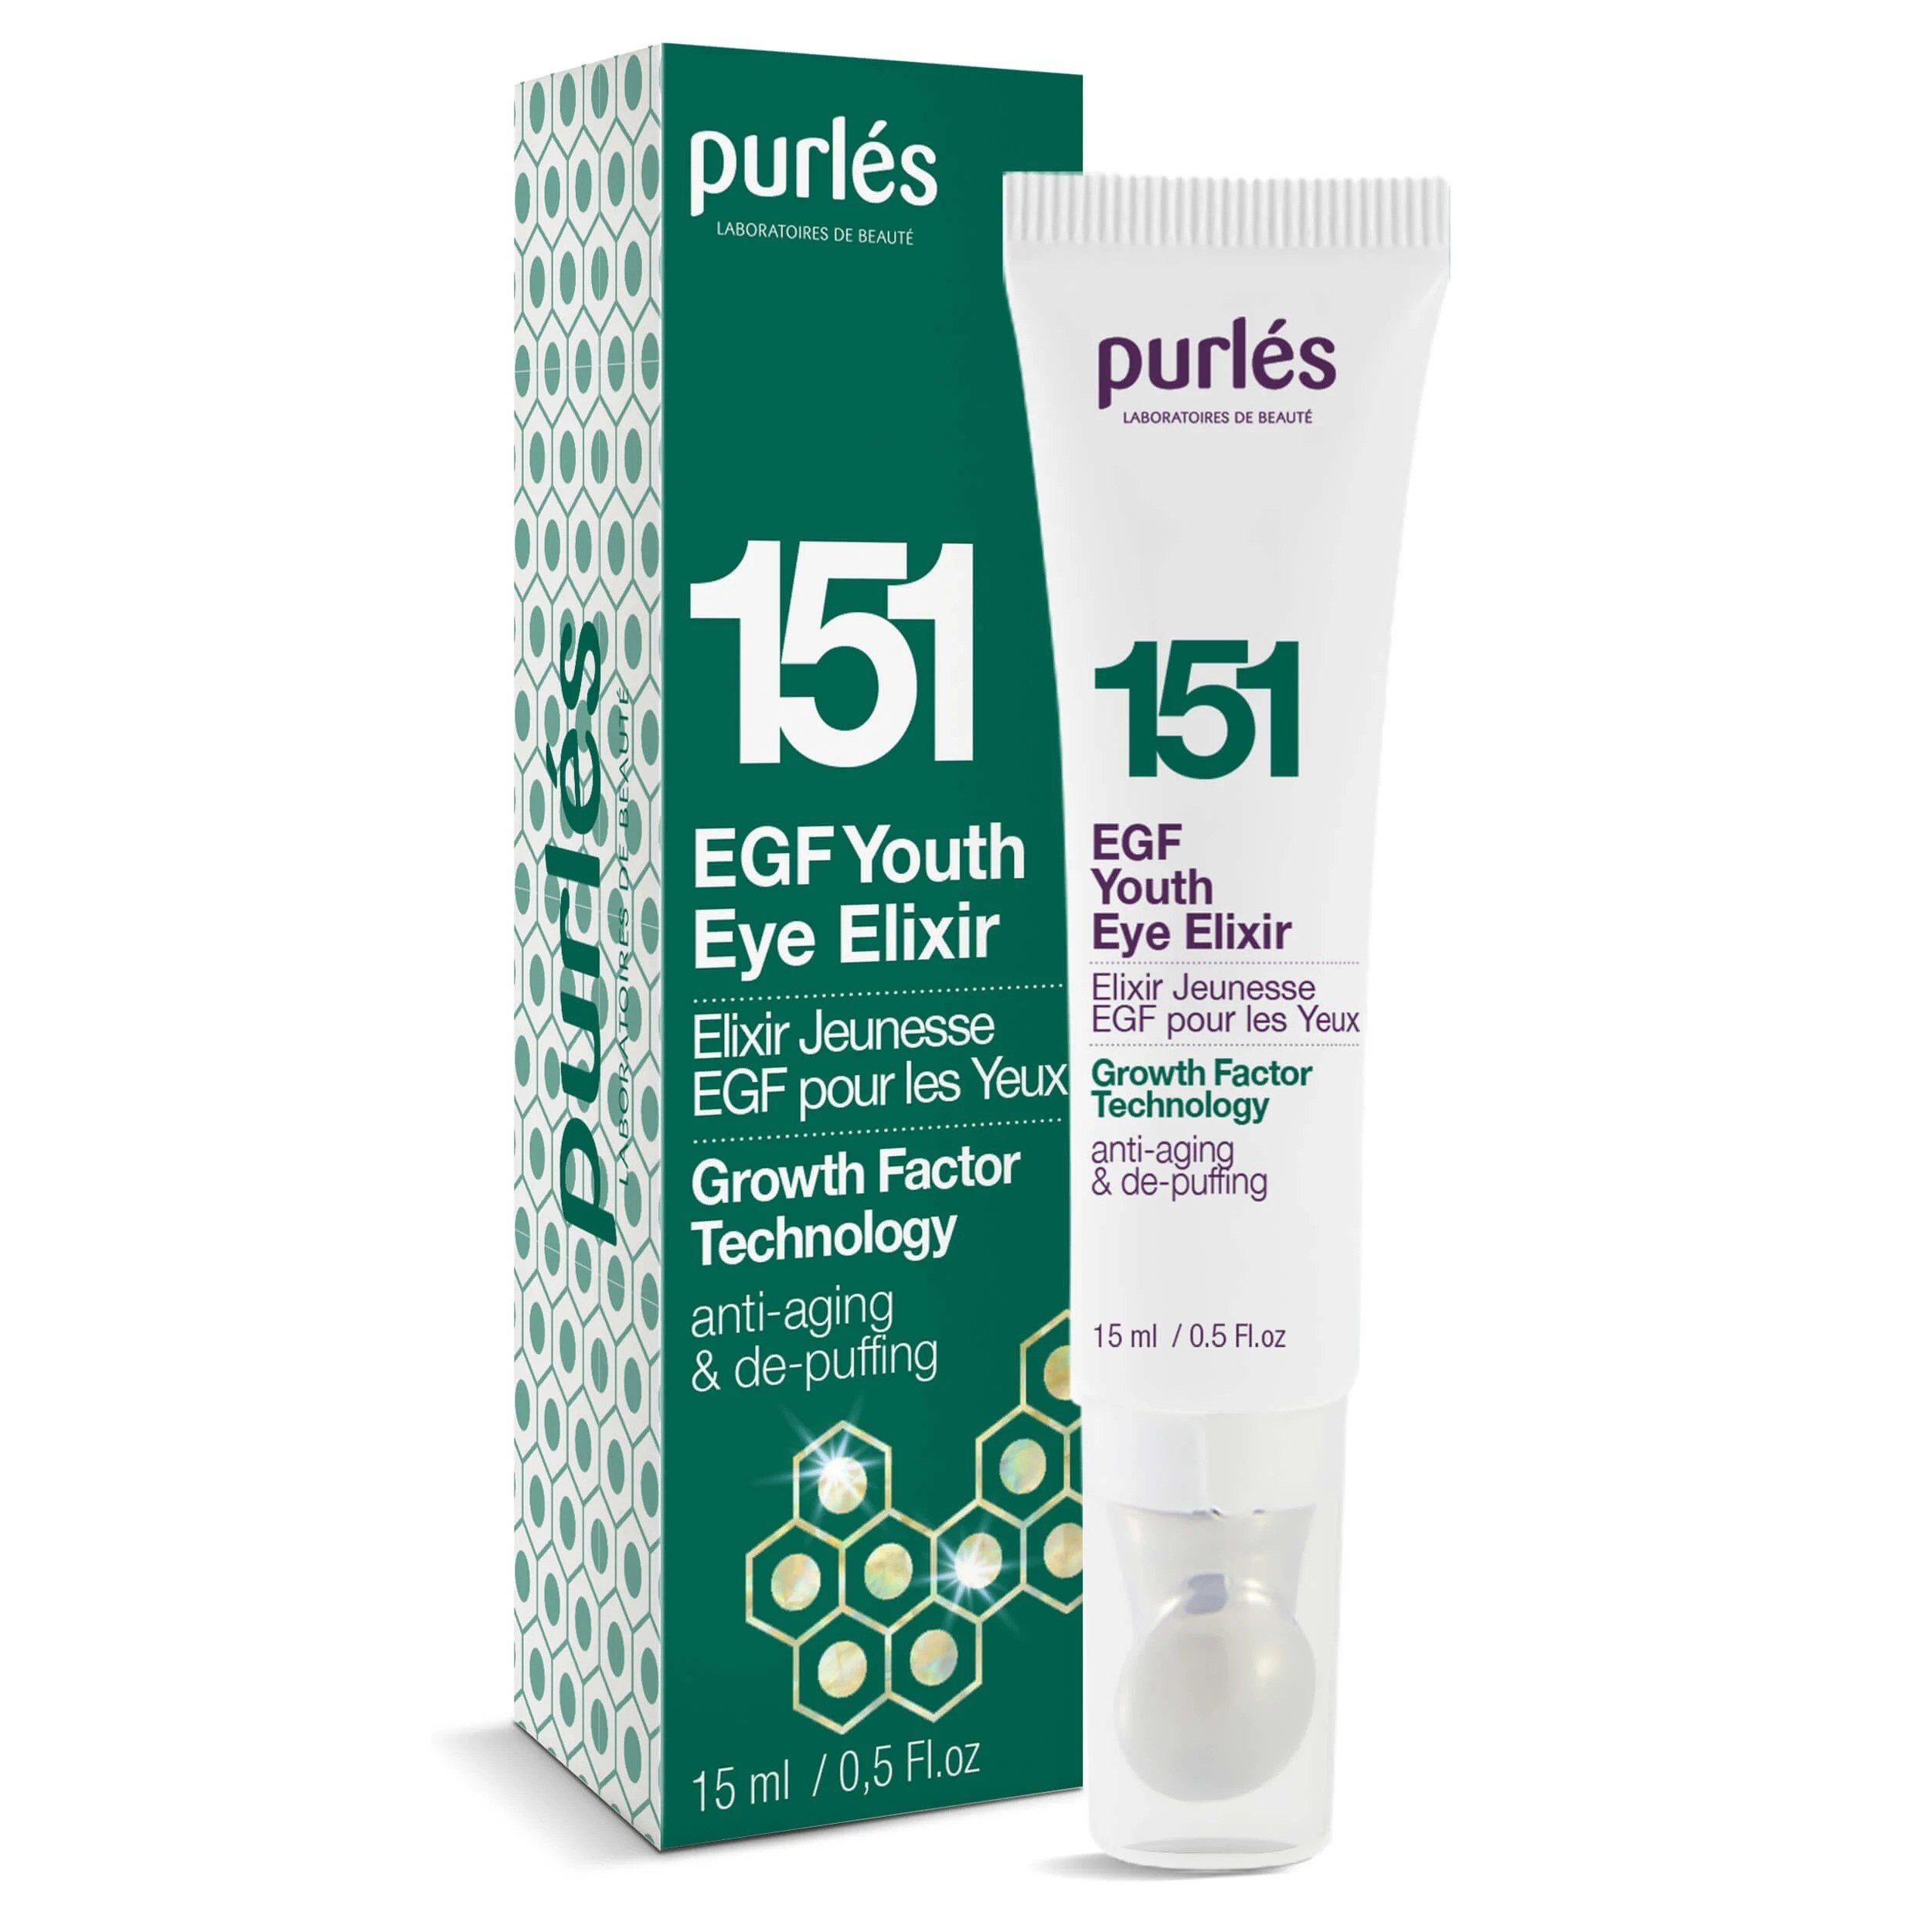 Purles 151 Growth Factor Technology EGF Youth Eye Elixir Anti Aging & De-Puffing 15ml